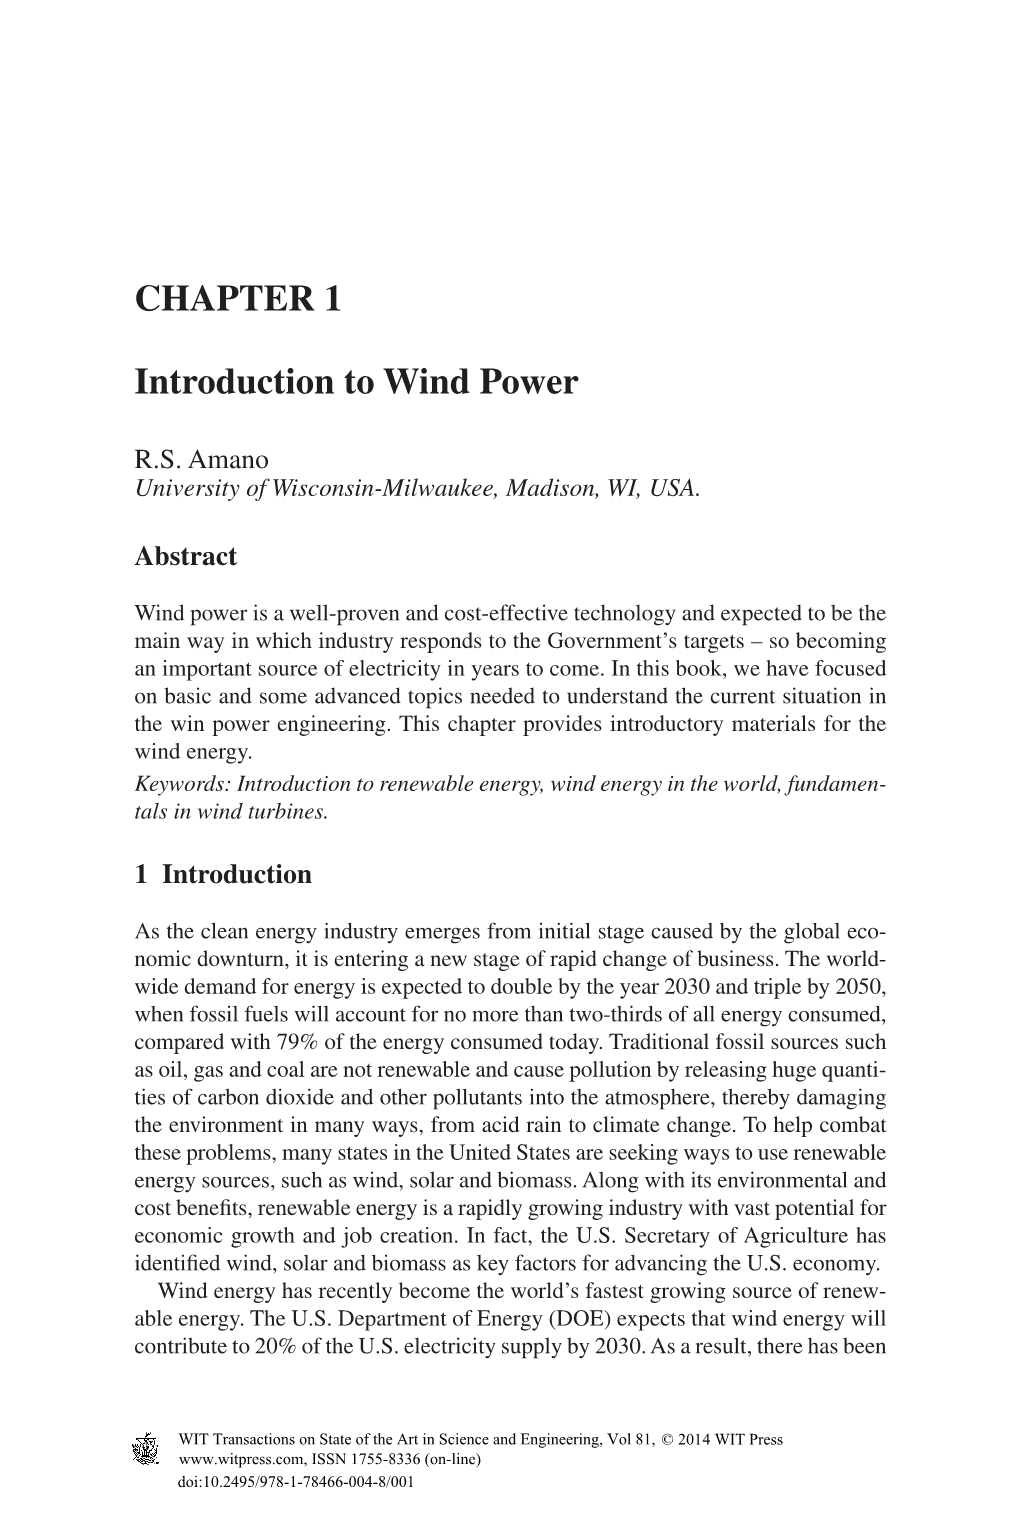 CHAPTER 1 Introduction to Wind Power